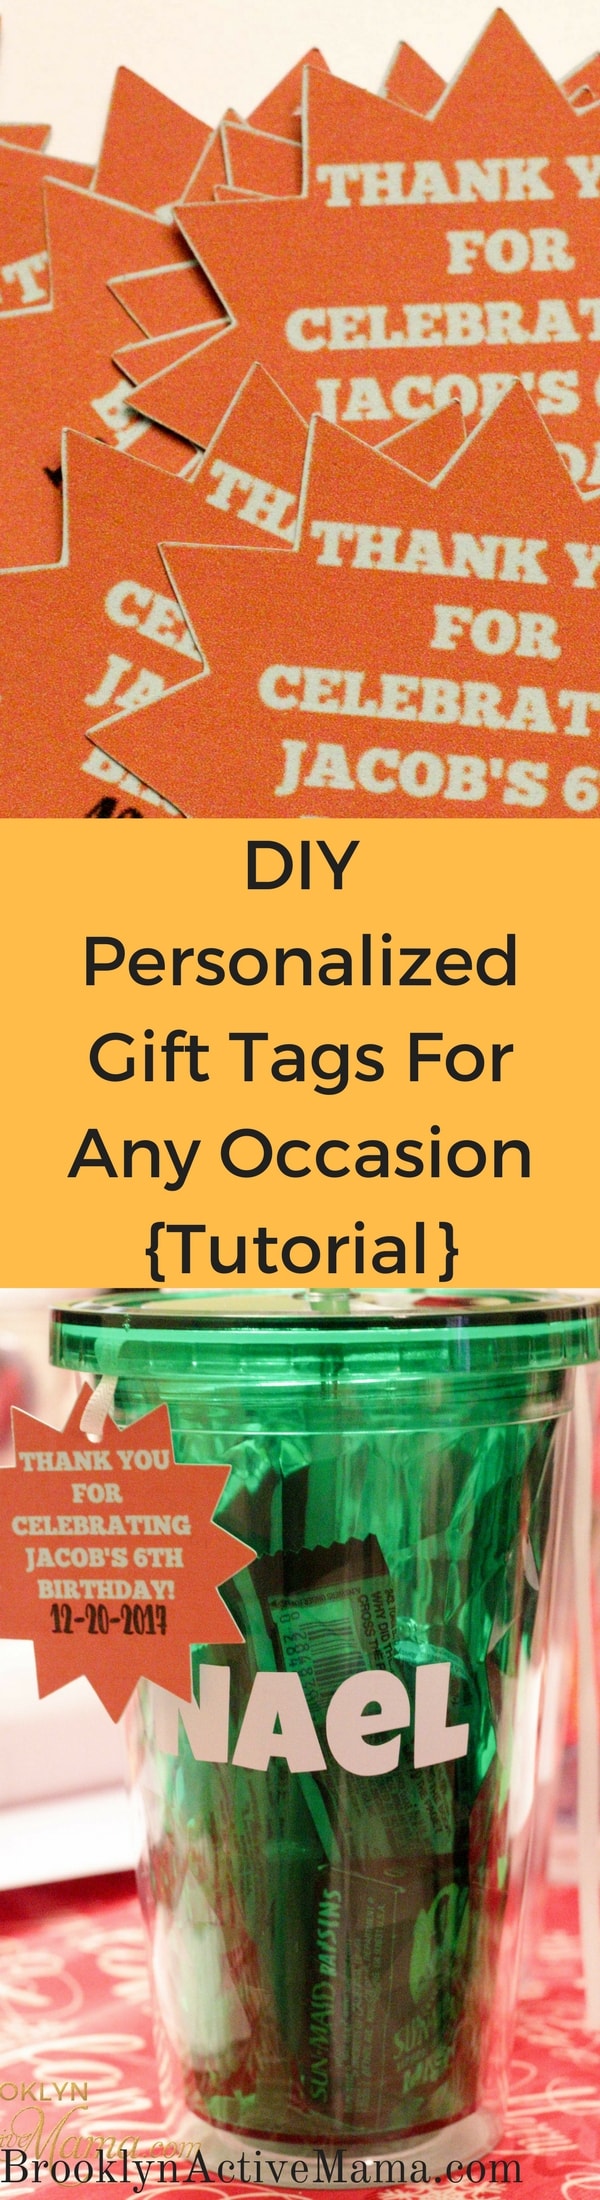 DIY Personalized Gift Tags For Any Occasion {Tutorial} Looking to jazz up those party bags and gifts? Check out this easy DIY craft that will take no time and leave a fun impression on your guests!